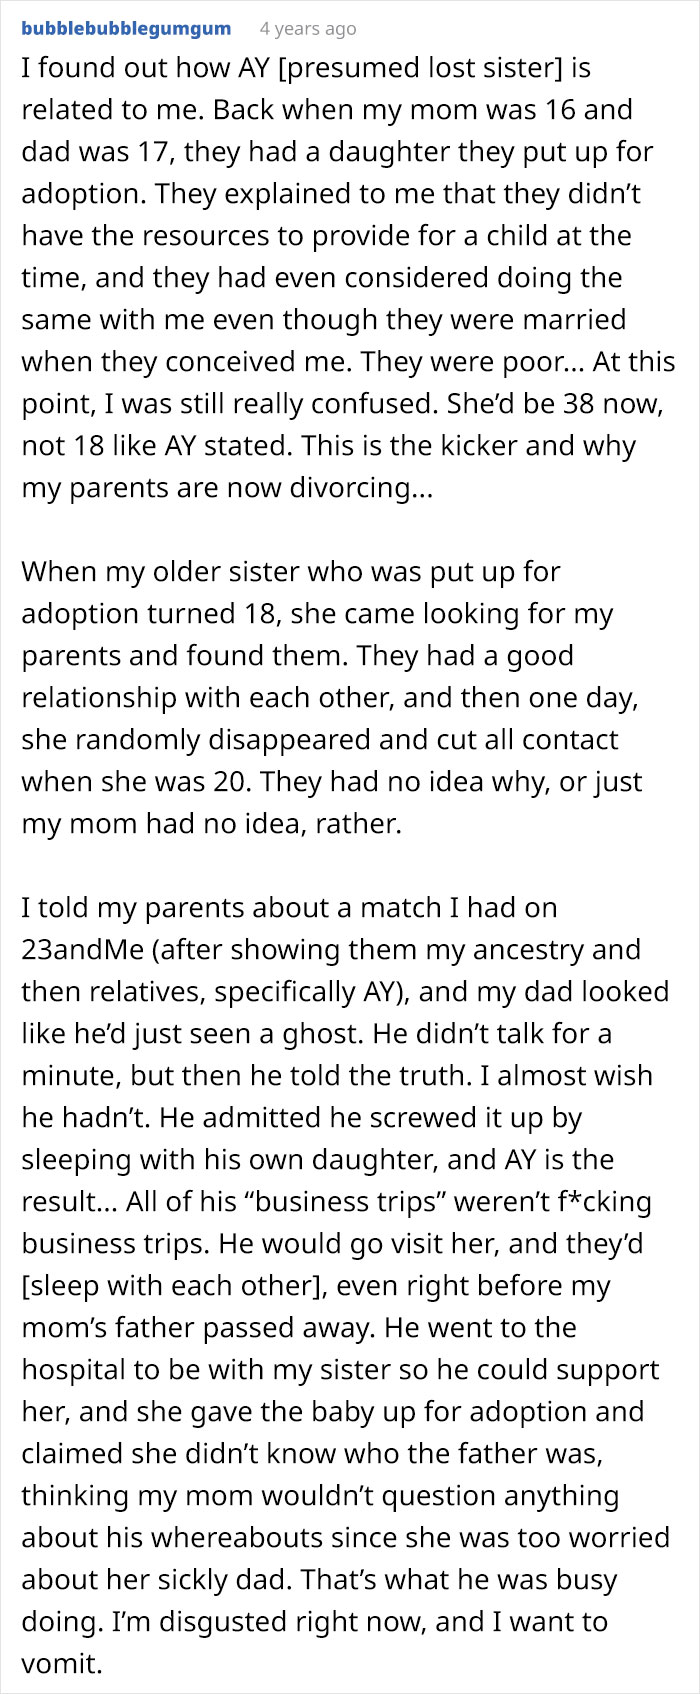 A Relative Turned Out To Be A Half-Sister And Niece